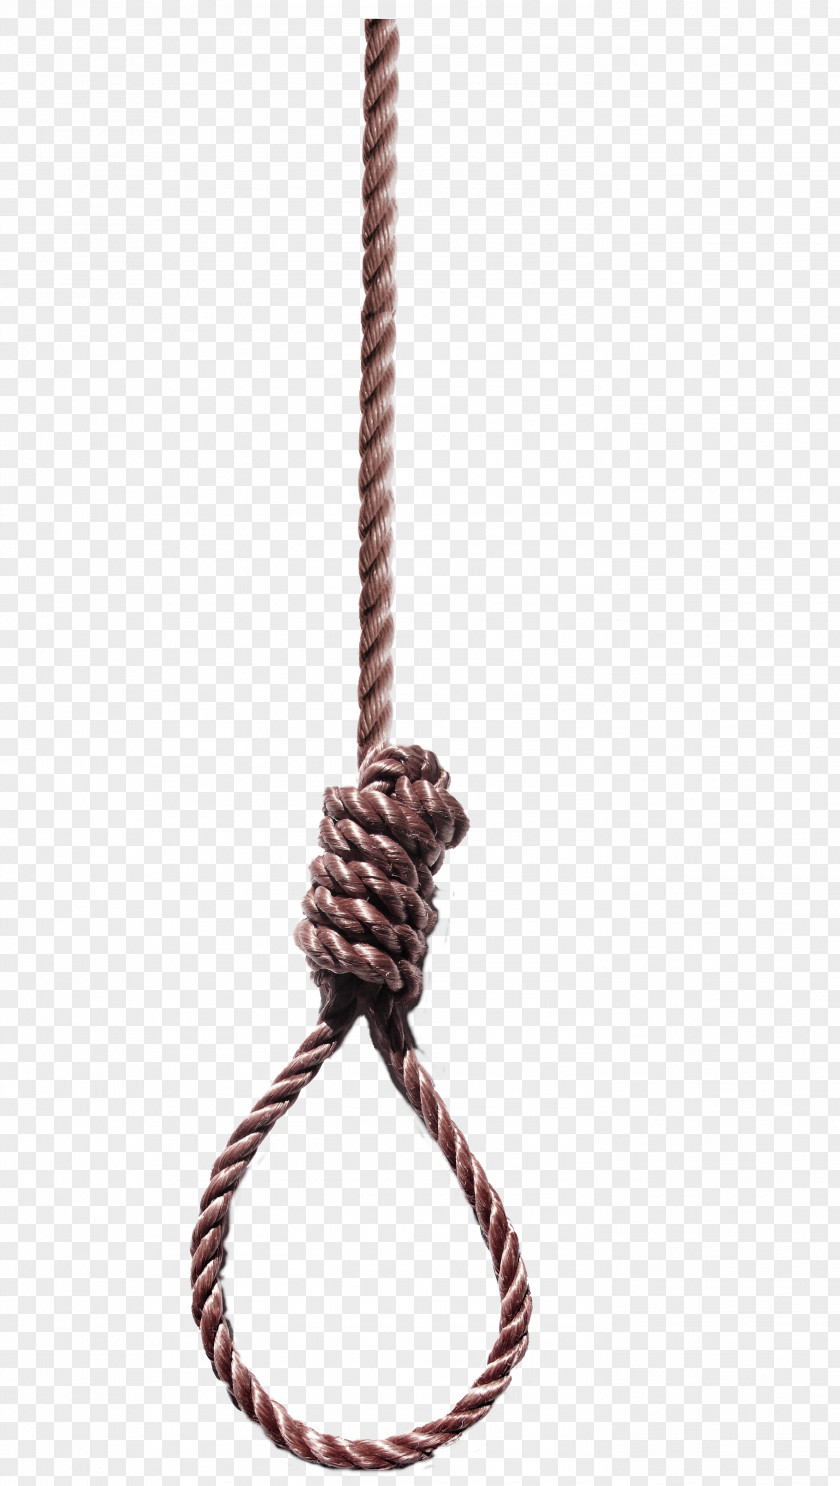 Brown Simple Rope Decoration Pattern Hanging Hangman's Knot Clip Art PNG